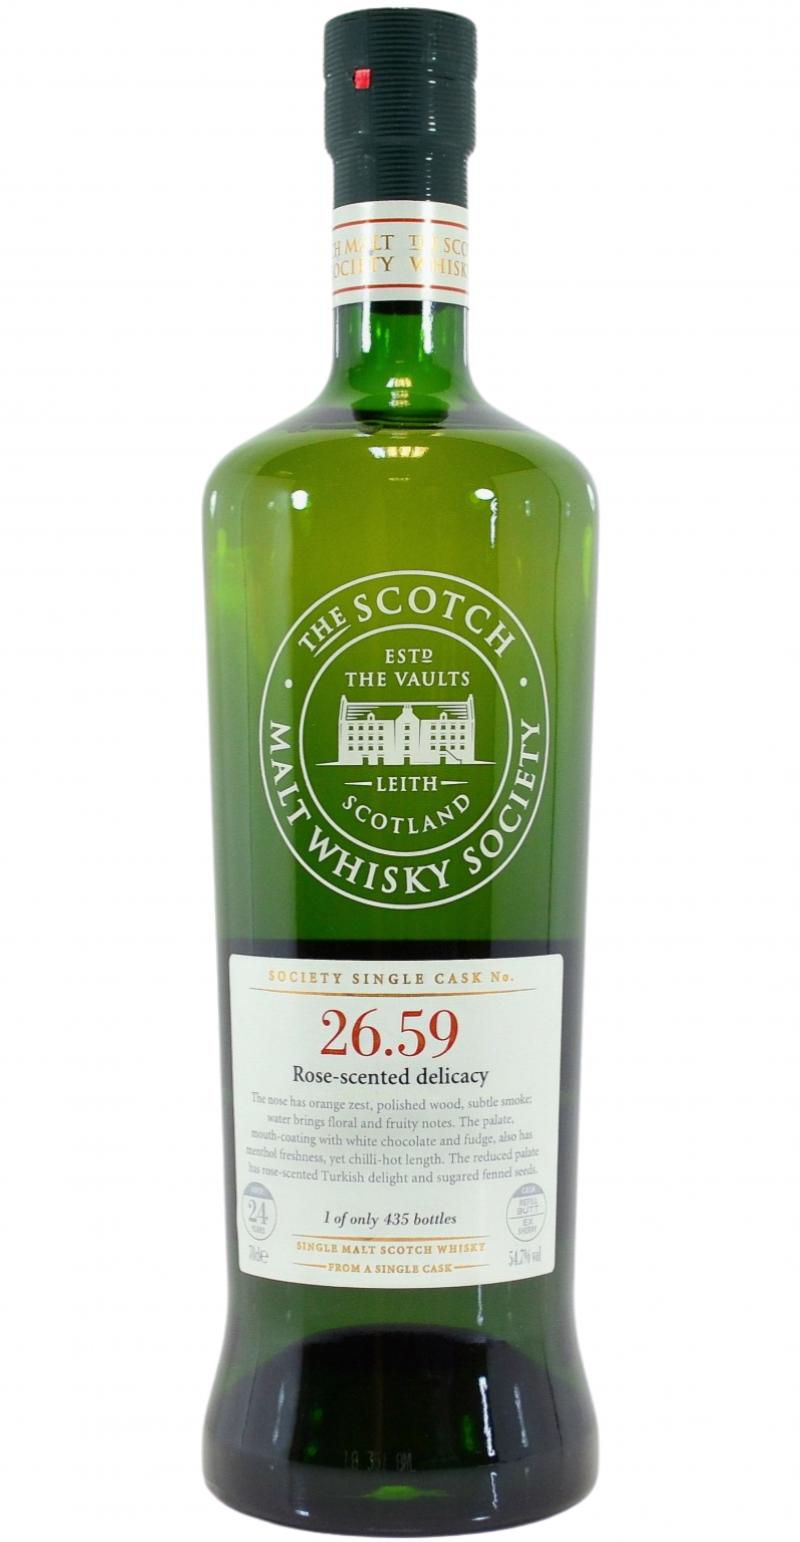 Clynelish 1984 SMWS 26.59 Rose-scented delicacy Refill Ex-Sherry Butt 54.7% 700ml